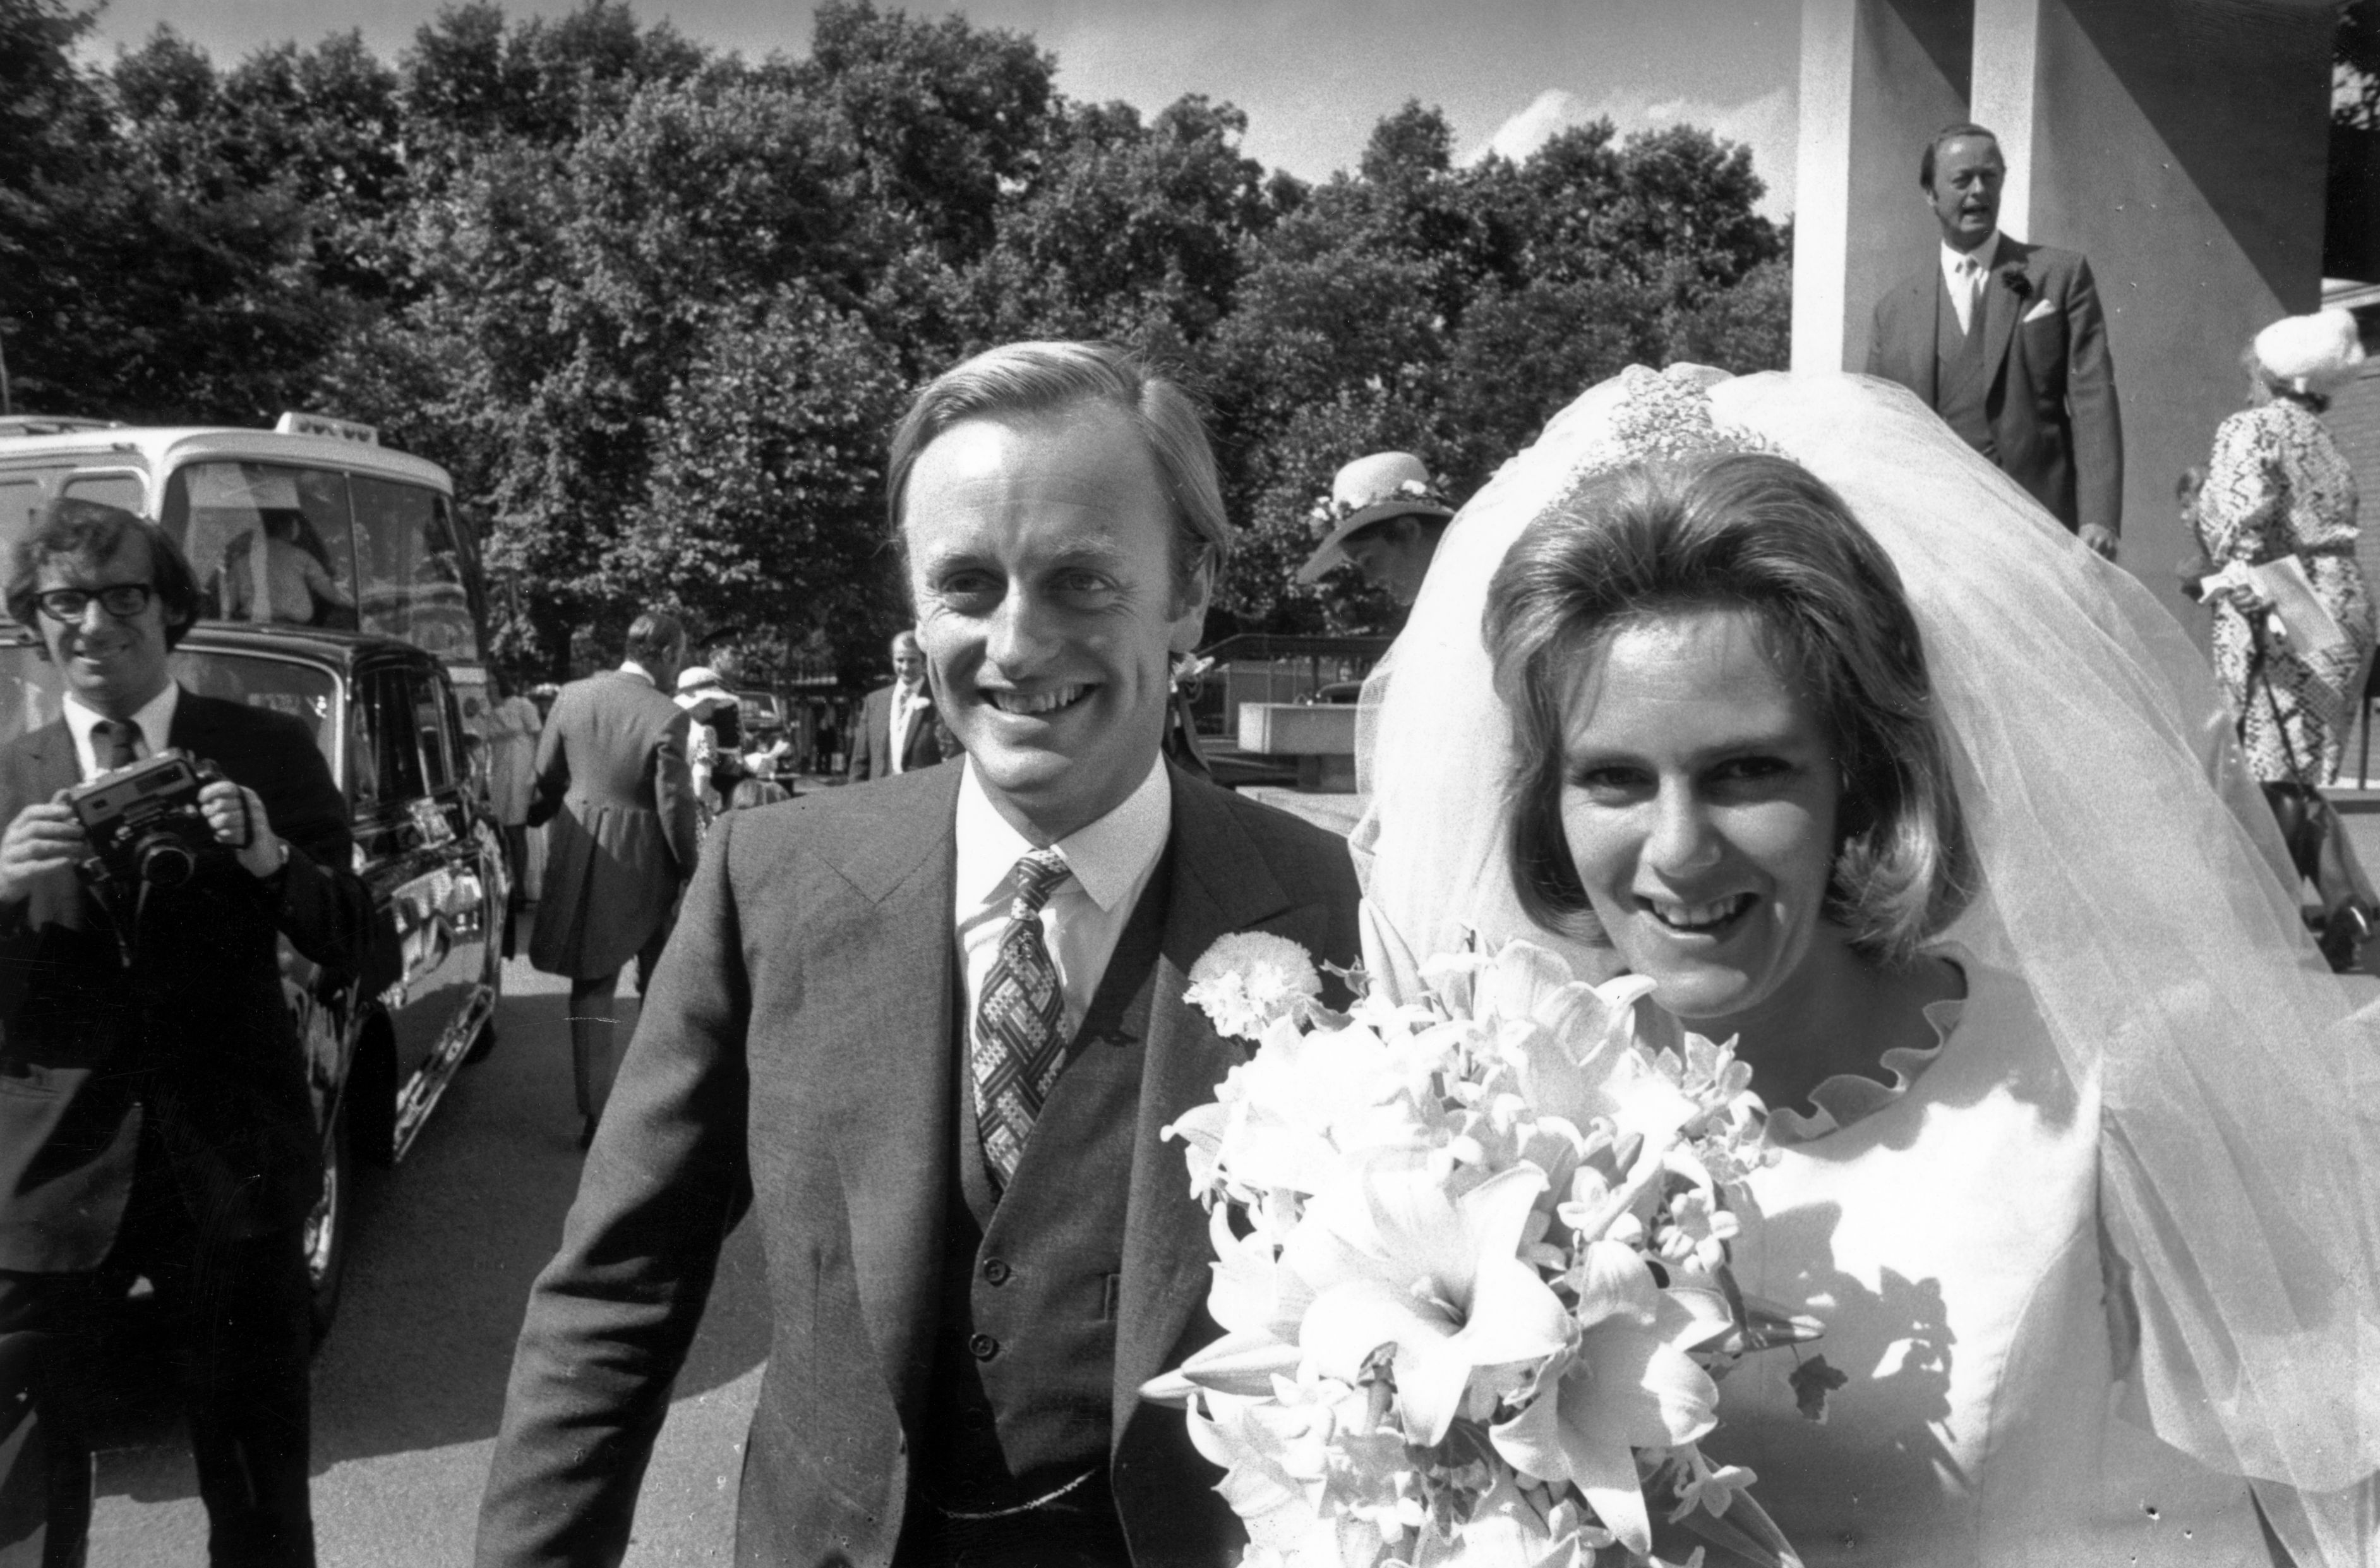 Camilla Shand and Captain Andrew Parker Bowles on their wedding day 4th July 1973 | Source: Getty Images